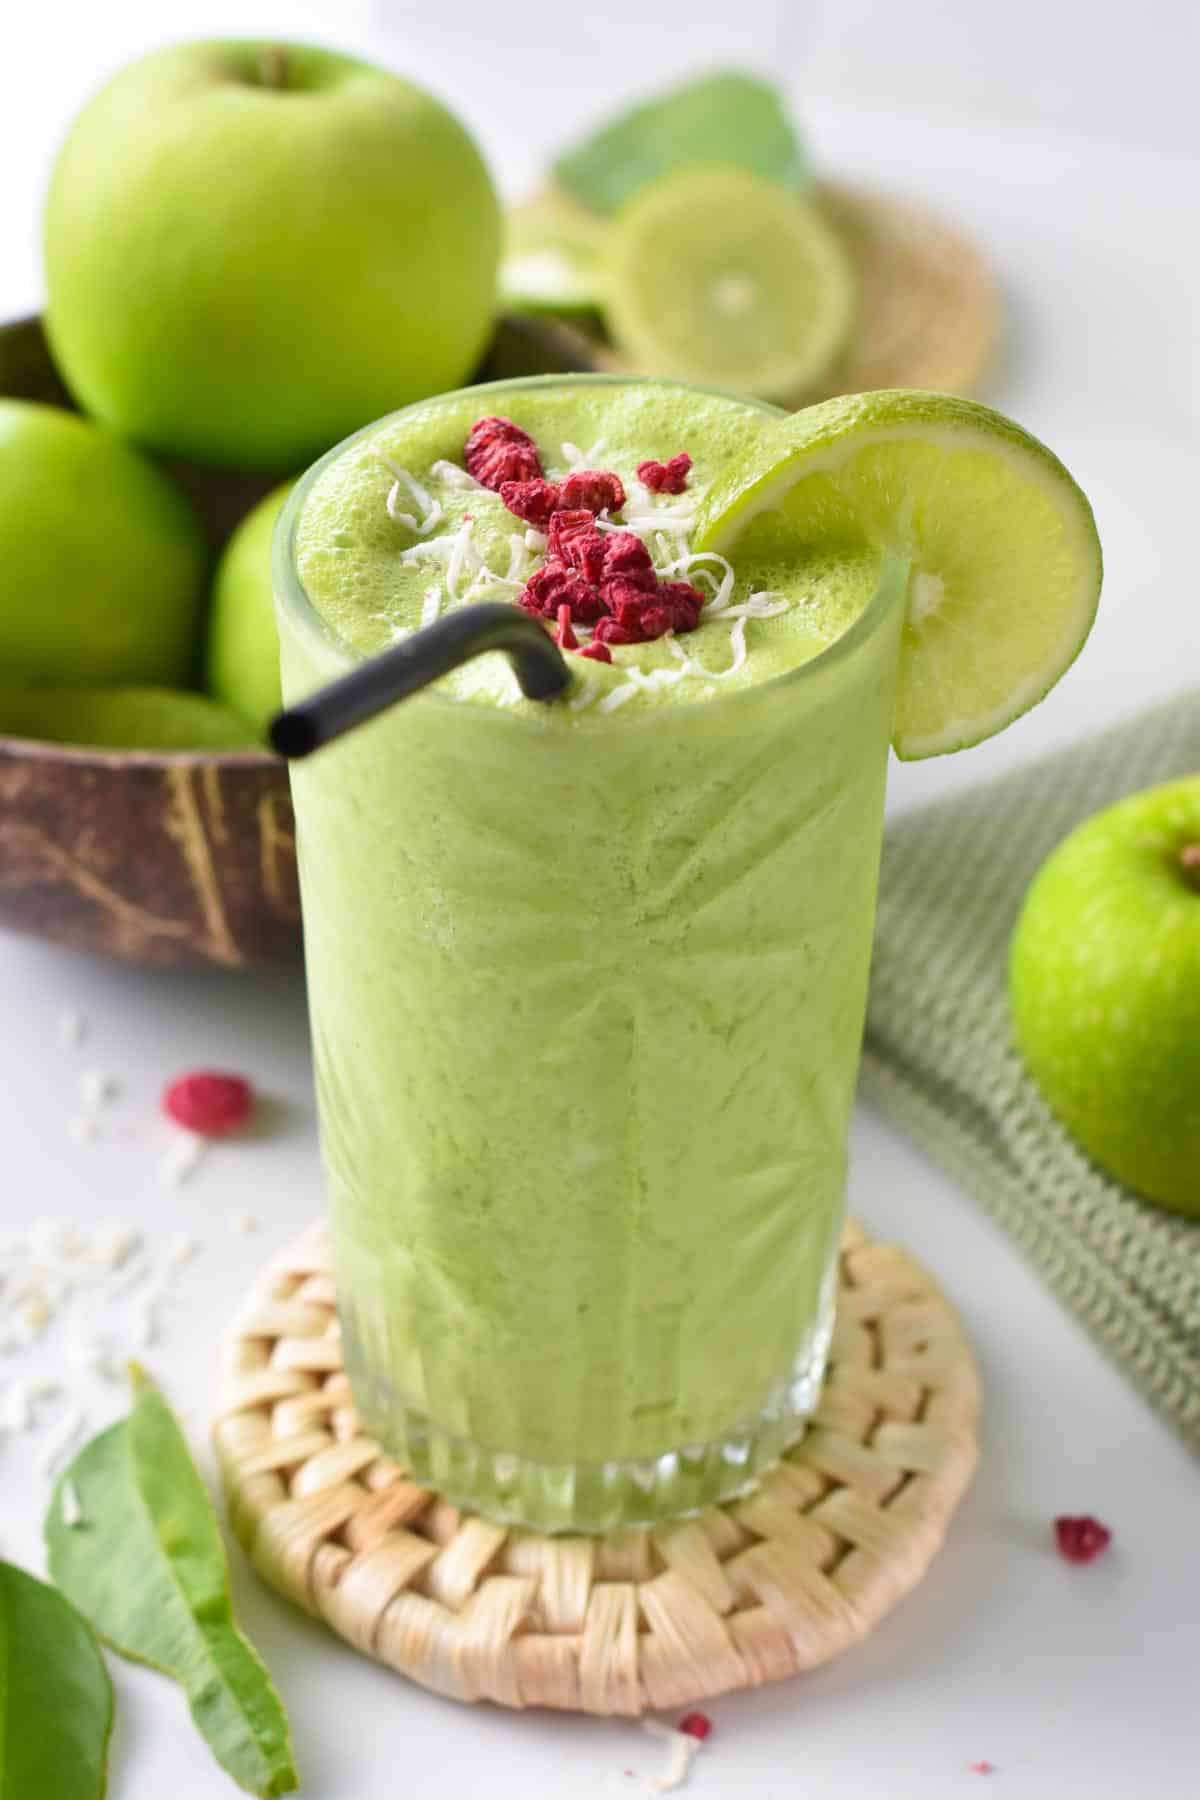 This Sour Apple Smoothie recipe is the perfect green smoothie for green apple lovers with a sweet and tart flavor. Plus, this green apple smoothie is also dairy-free and gluten-free.